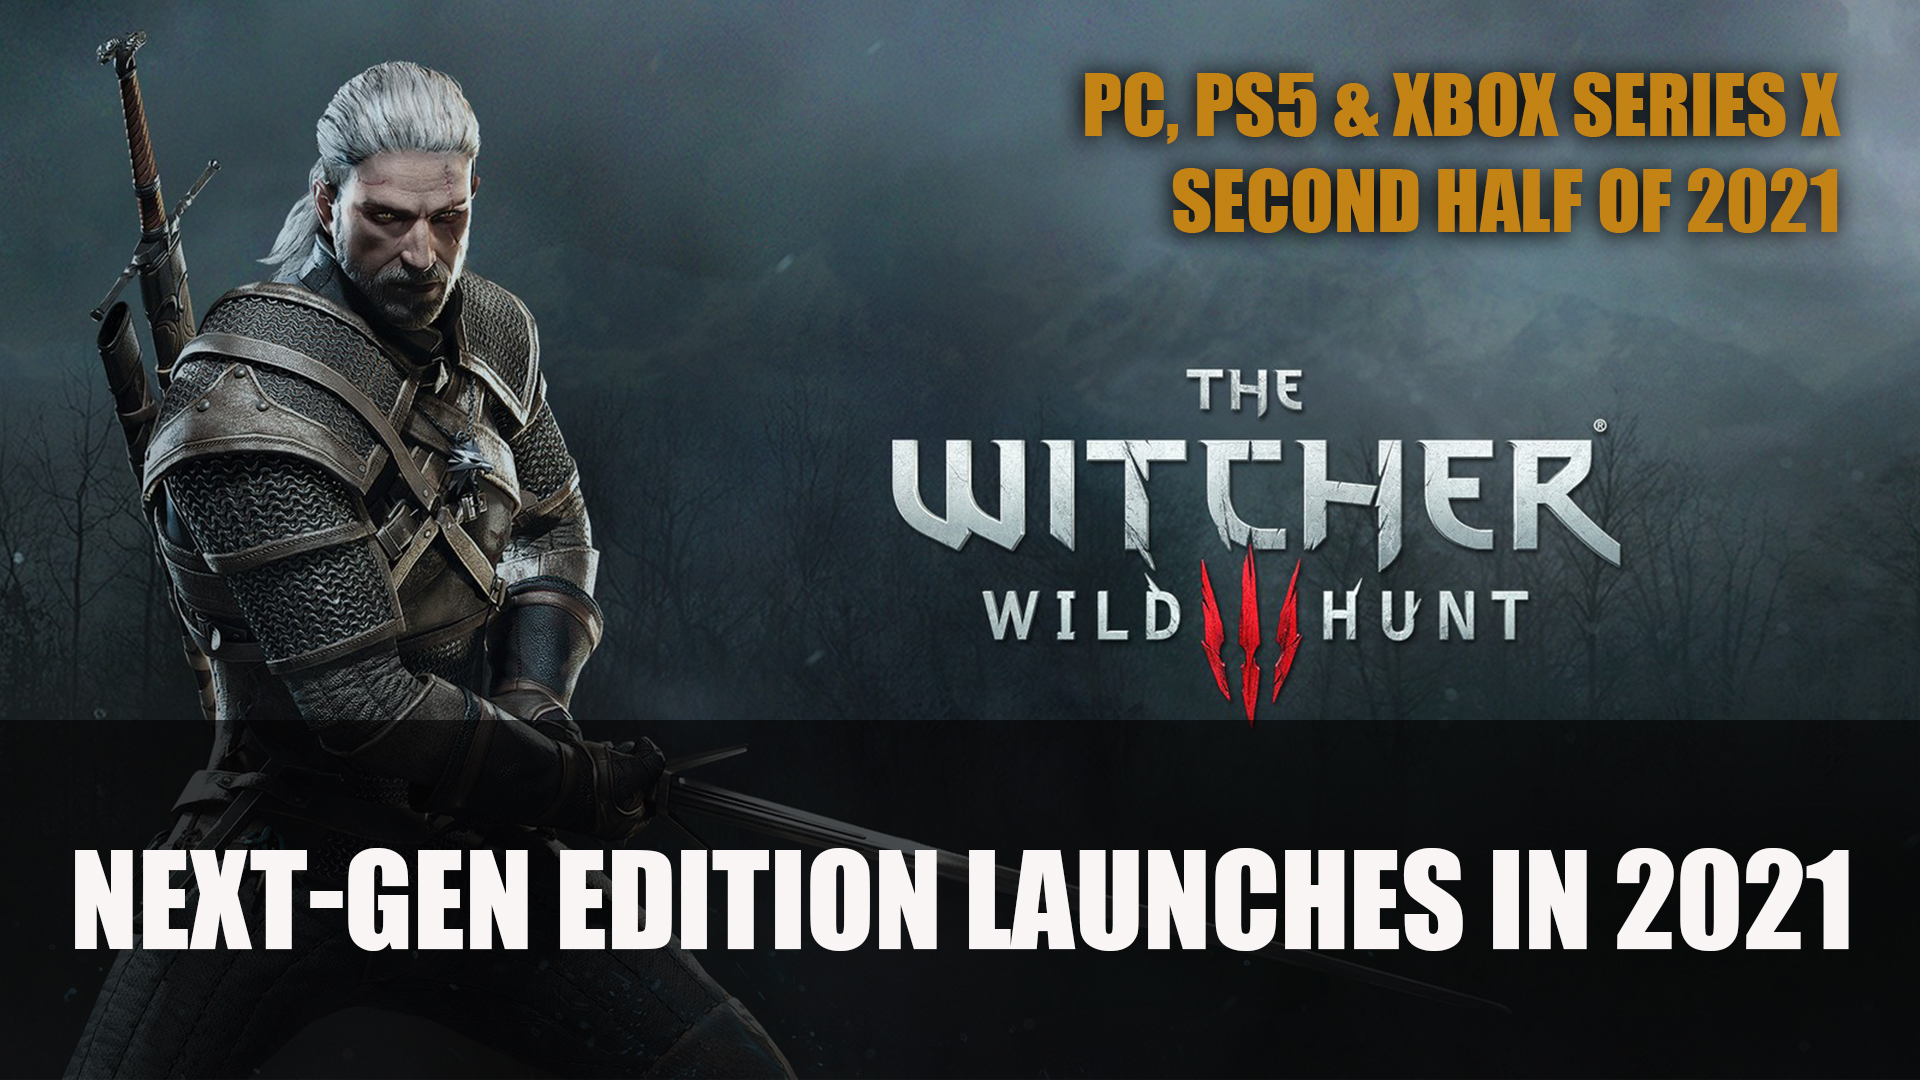 CD Projekt Red shows off The Witcher 3's 'next-gen update' ahead of launch